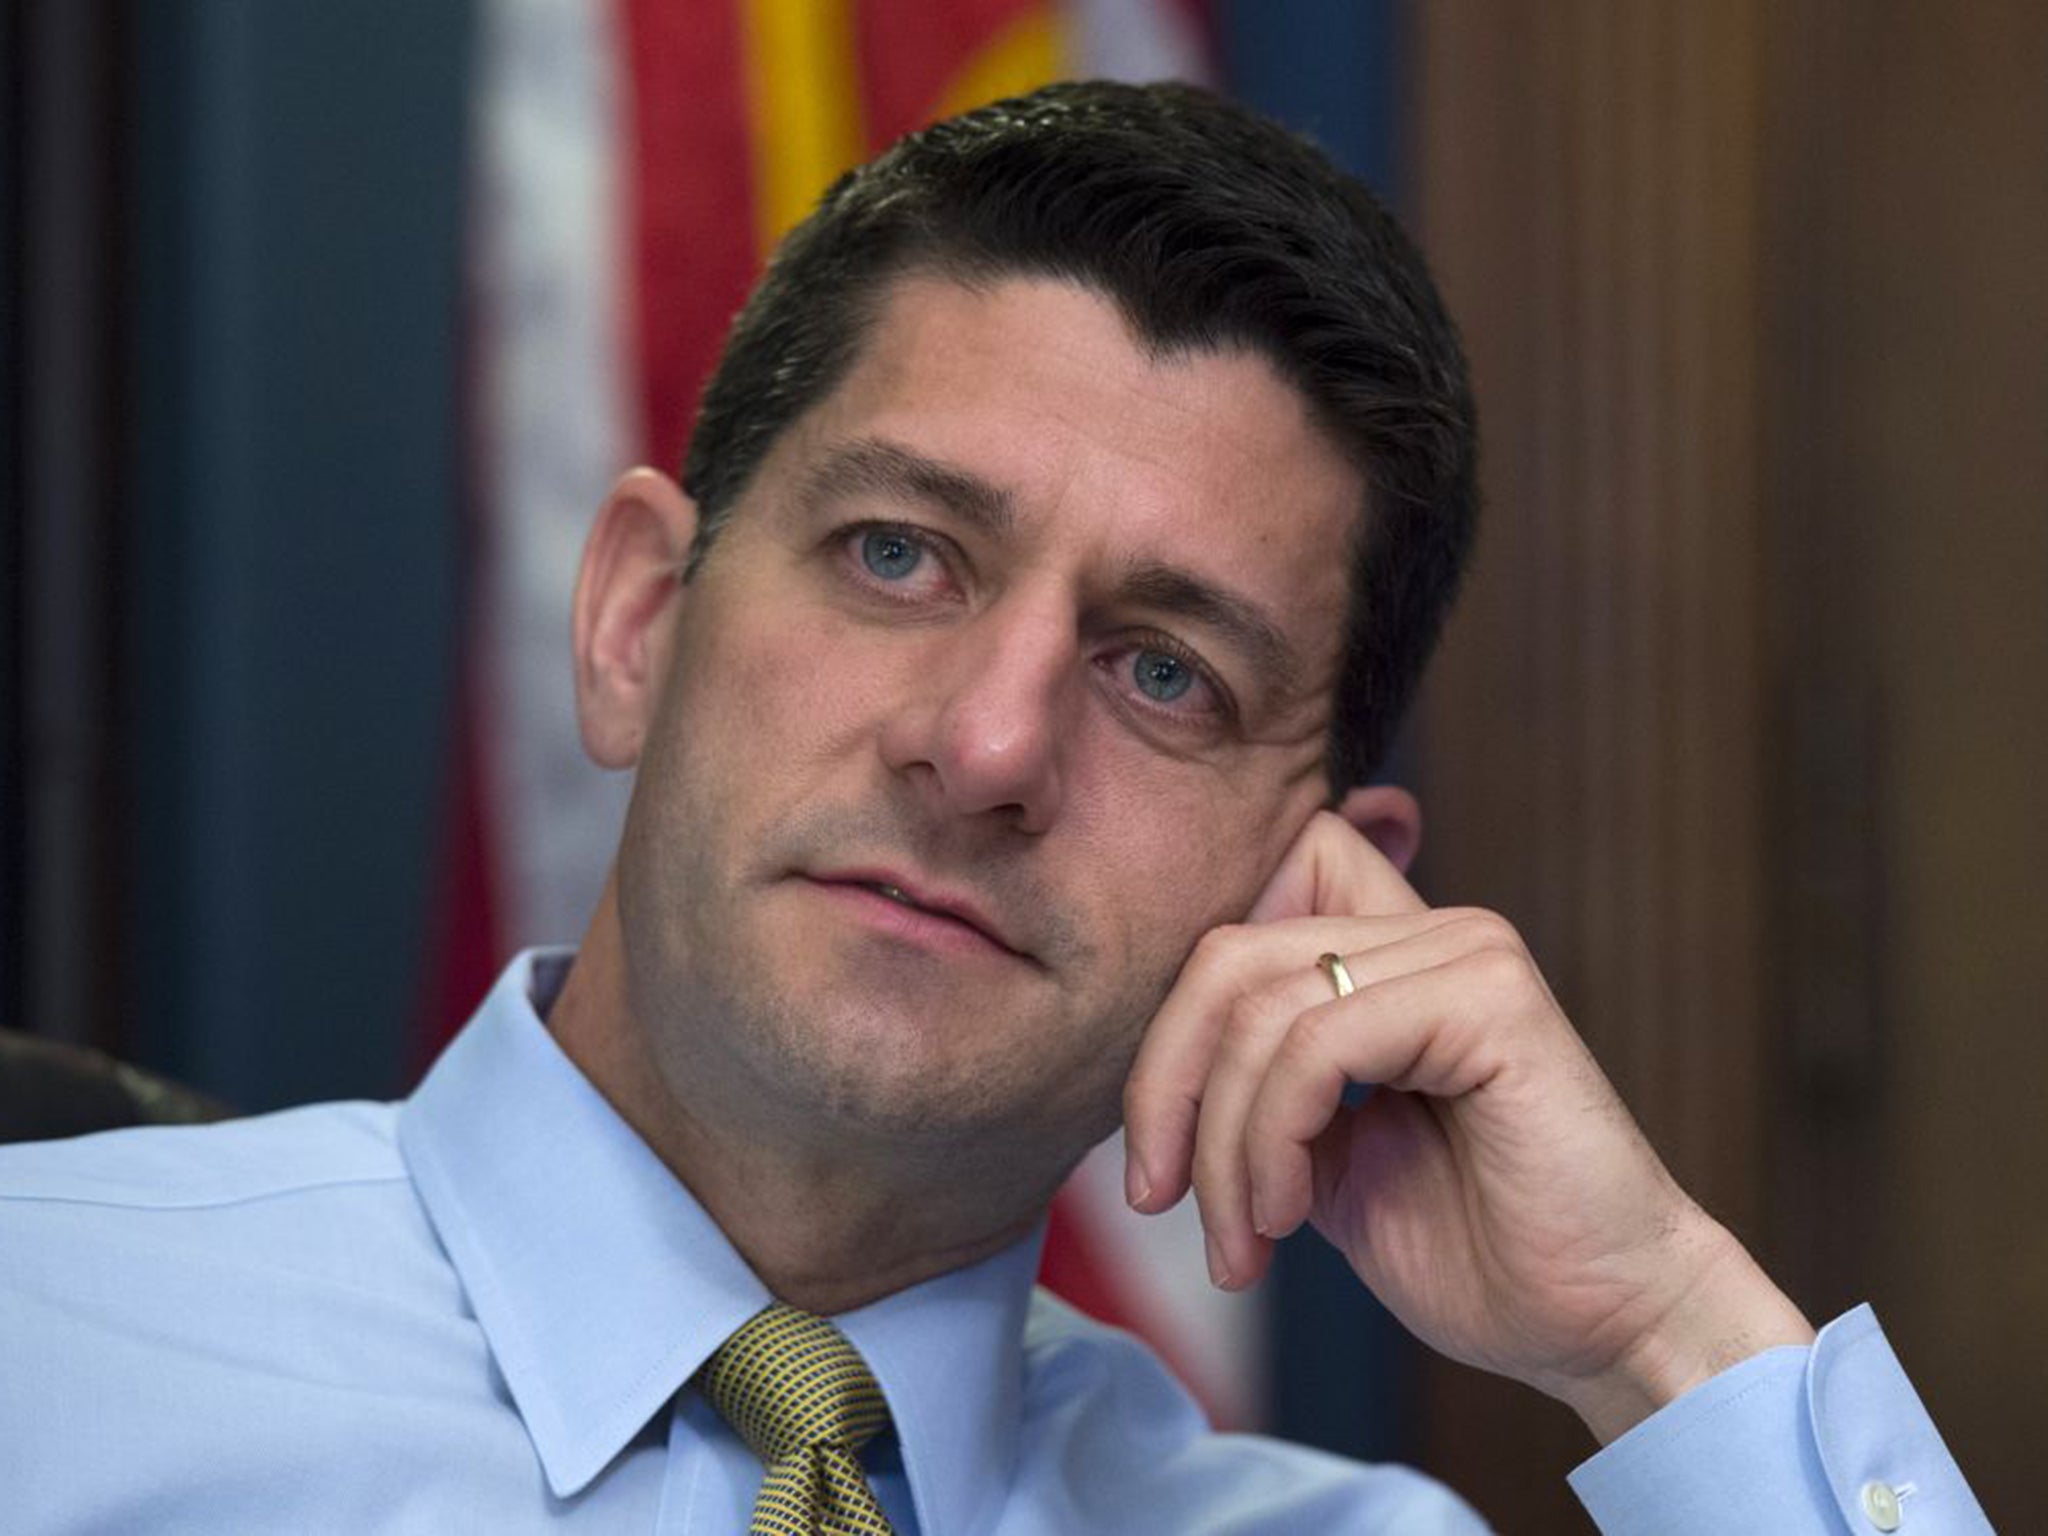 Paul Ryan, congressman for Wisconsin, will declare his intention to stand for Speaker, or not, on Wednesday